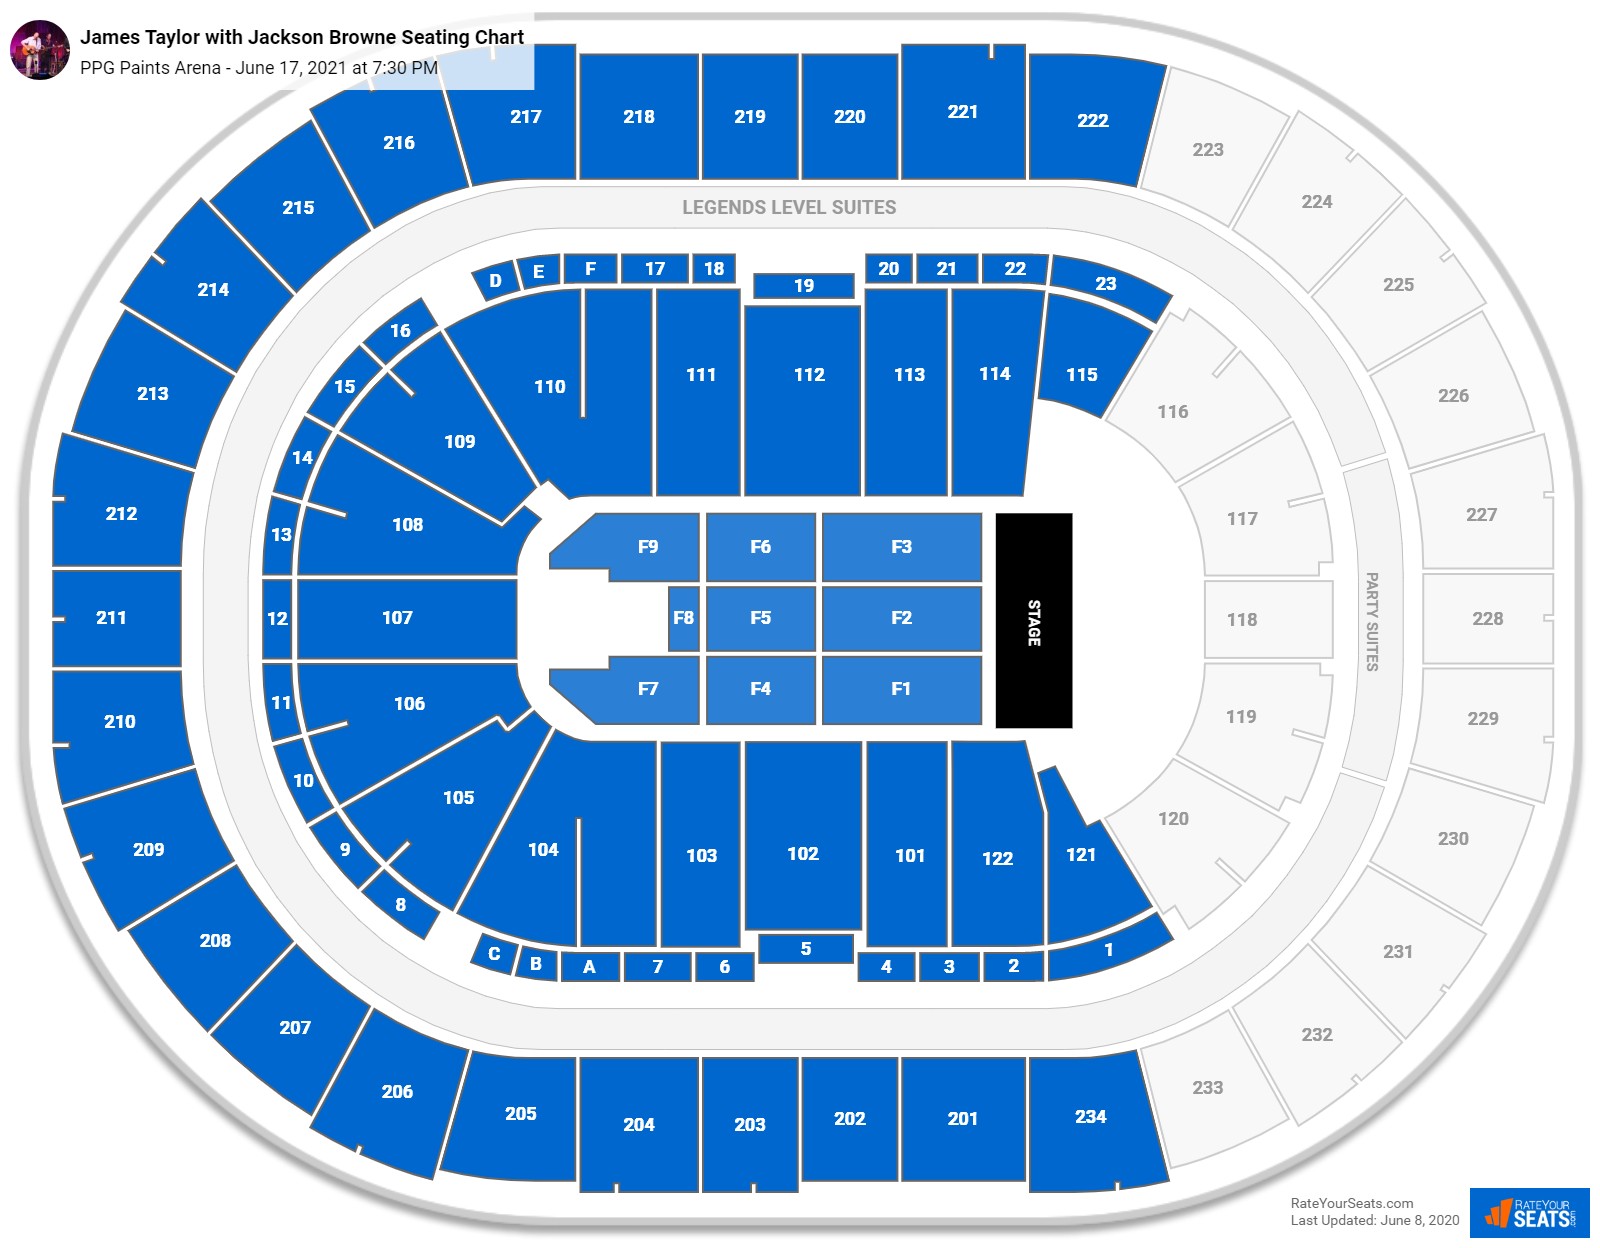 PPG Paints Arena Seating Charts for Concerts